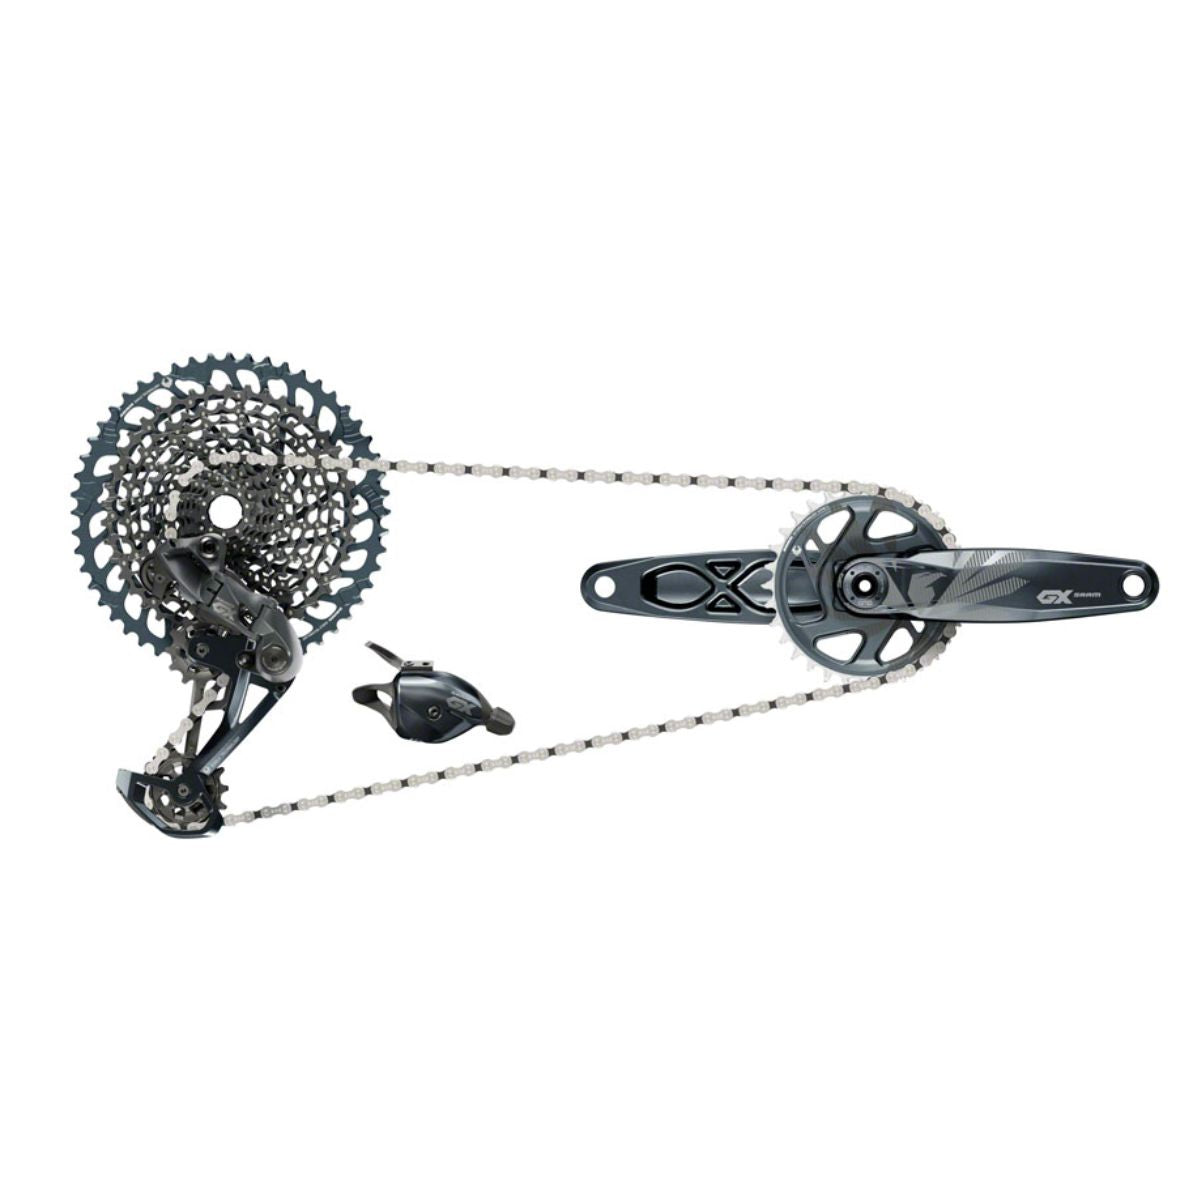 SRAM GX Eagle Groupset - 175mm Boost Crankset, 32t, DUB, Trigger Shifter, Rear Derailleur, 12-Speed 10-52t Cassette and 12-Speed Chain - Groupsets - Bicycle Warehouse